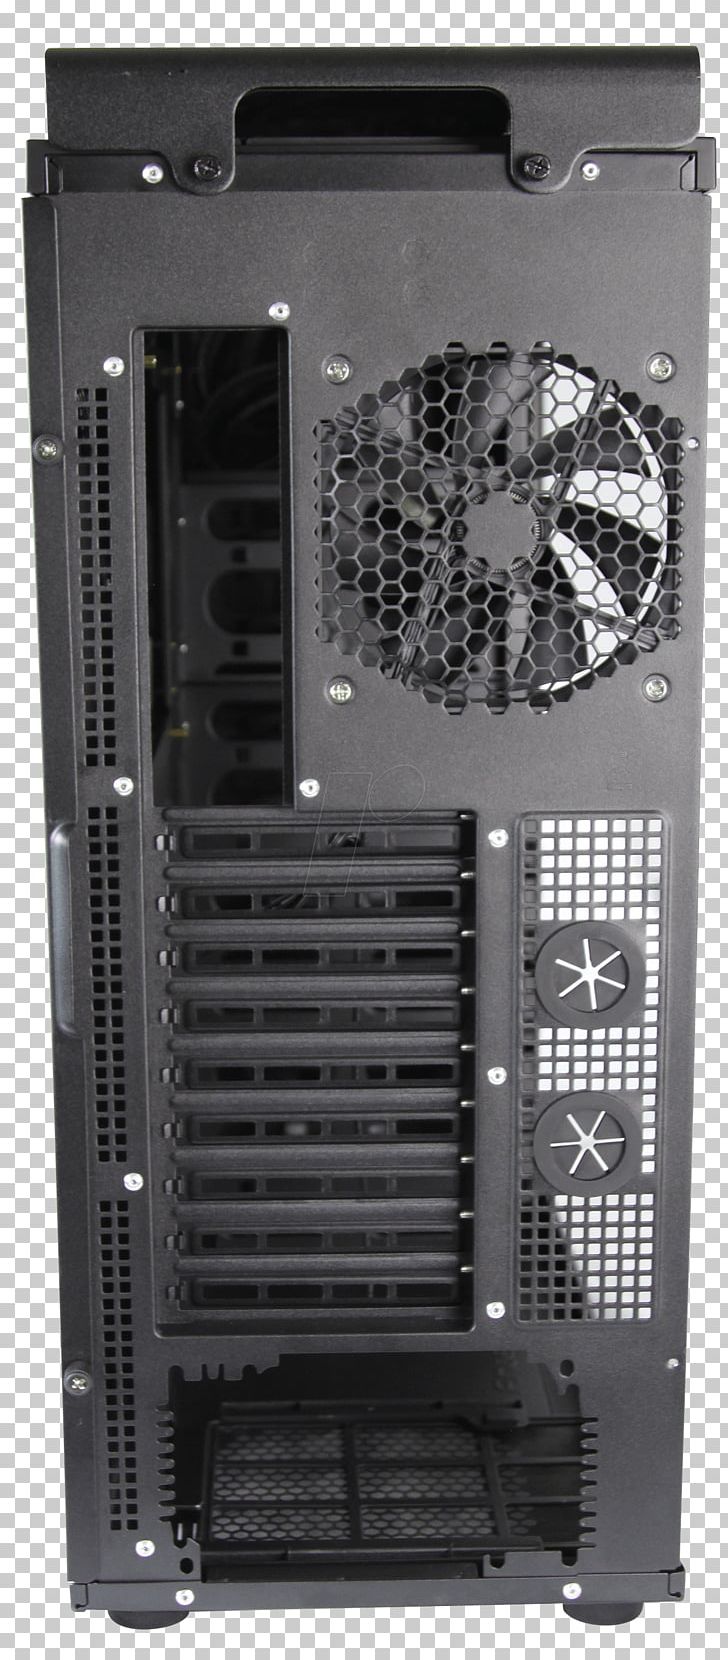 Computer Cases & Housings Antec MicroATX Computer System Cooling Parts PNG, Clipart, Antec, Atx, Computer, Computer Case, Computer Cases Housings Free PNG Download